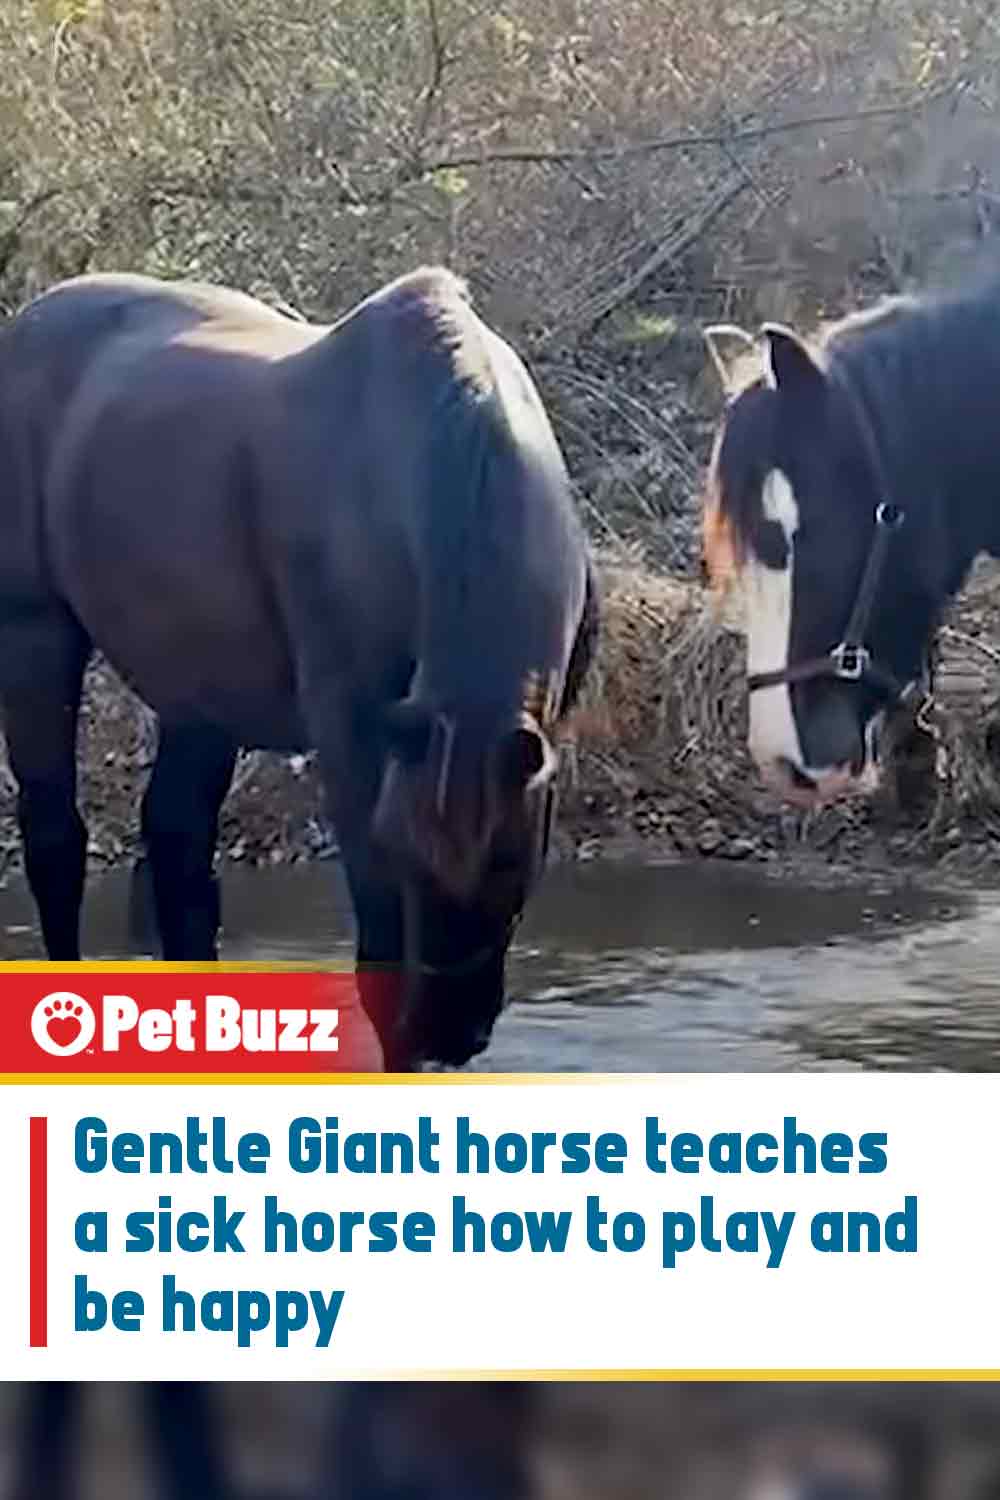 Gentle Giant horse teaches a sick horse how to play and be happy